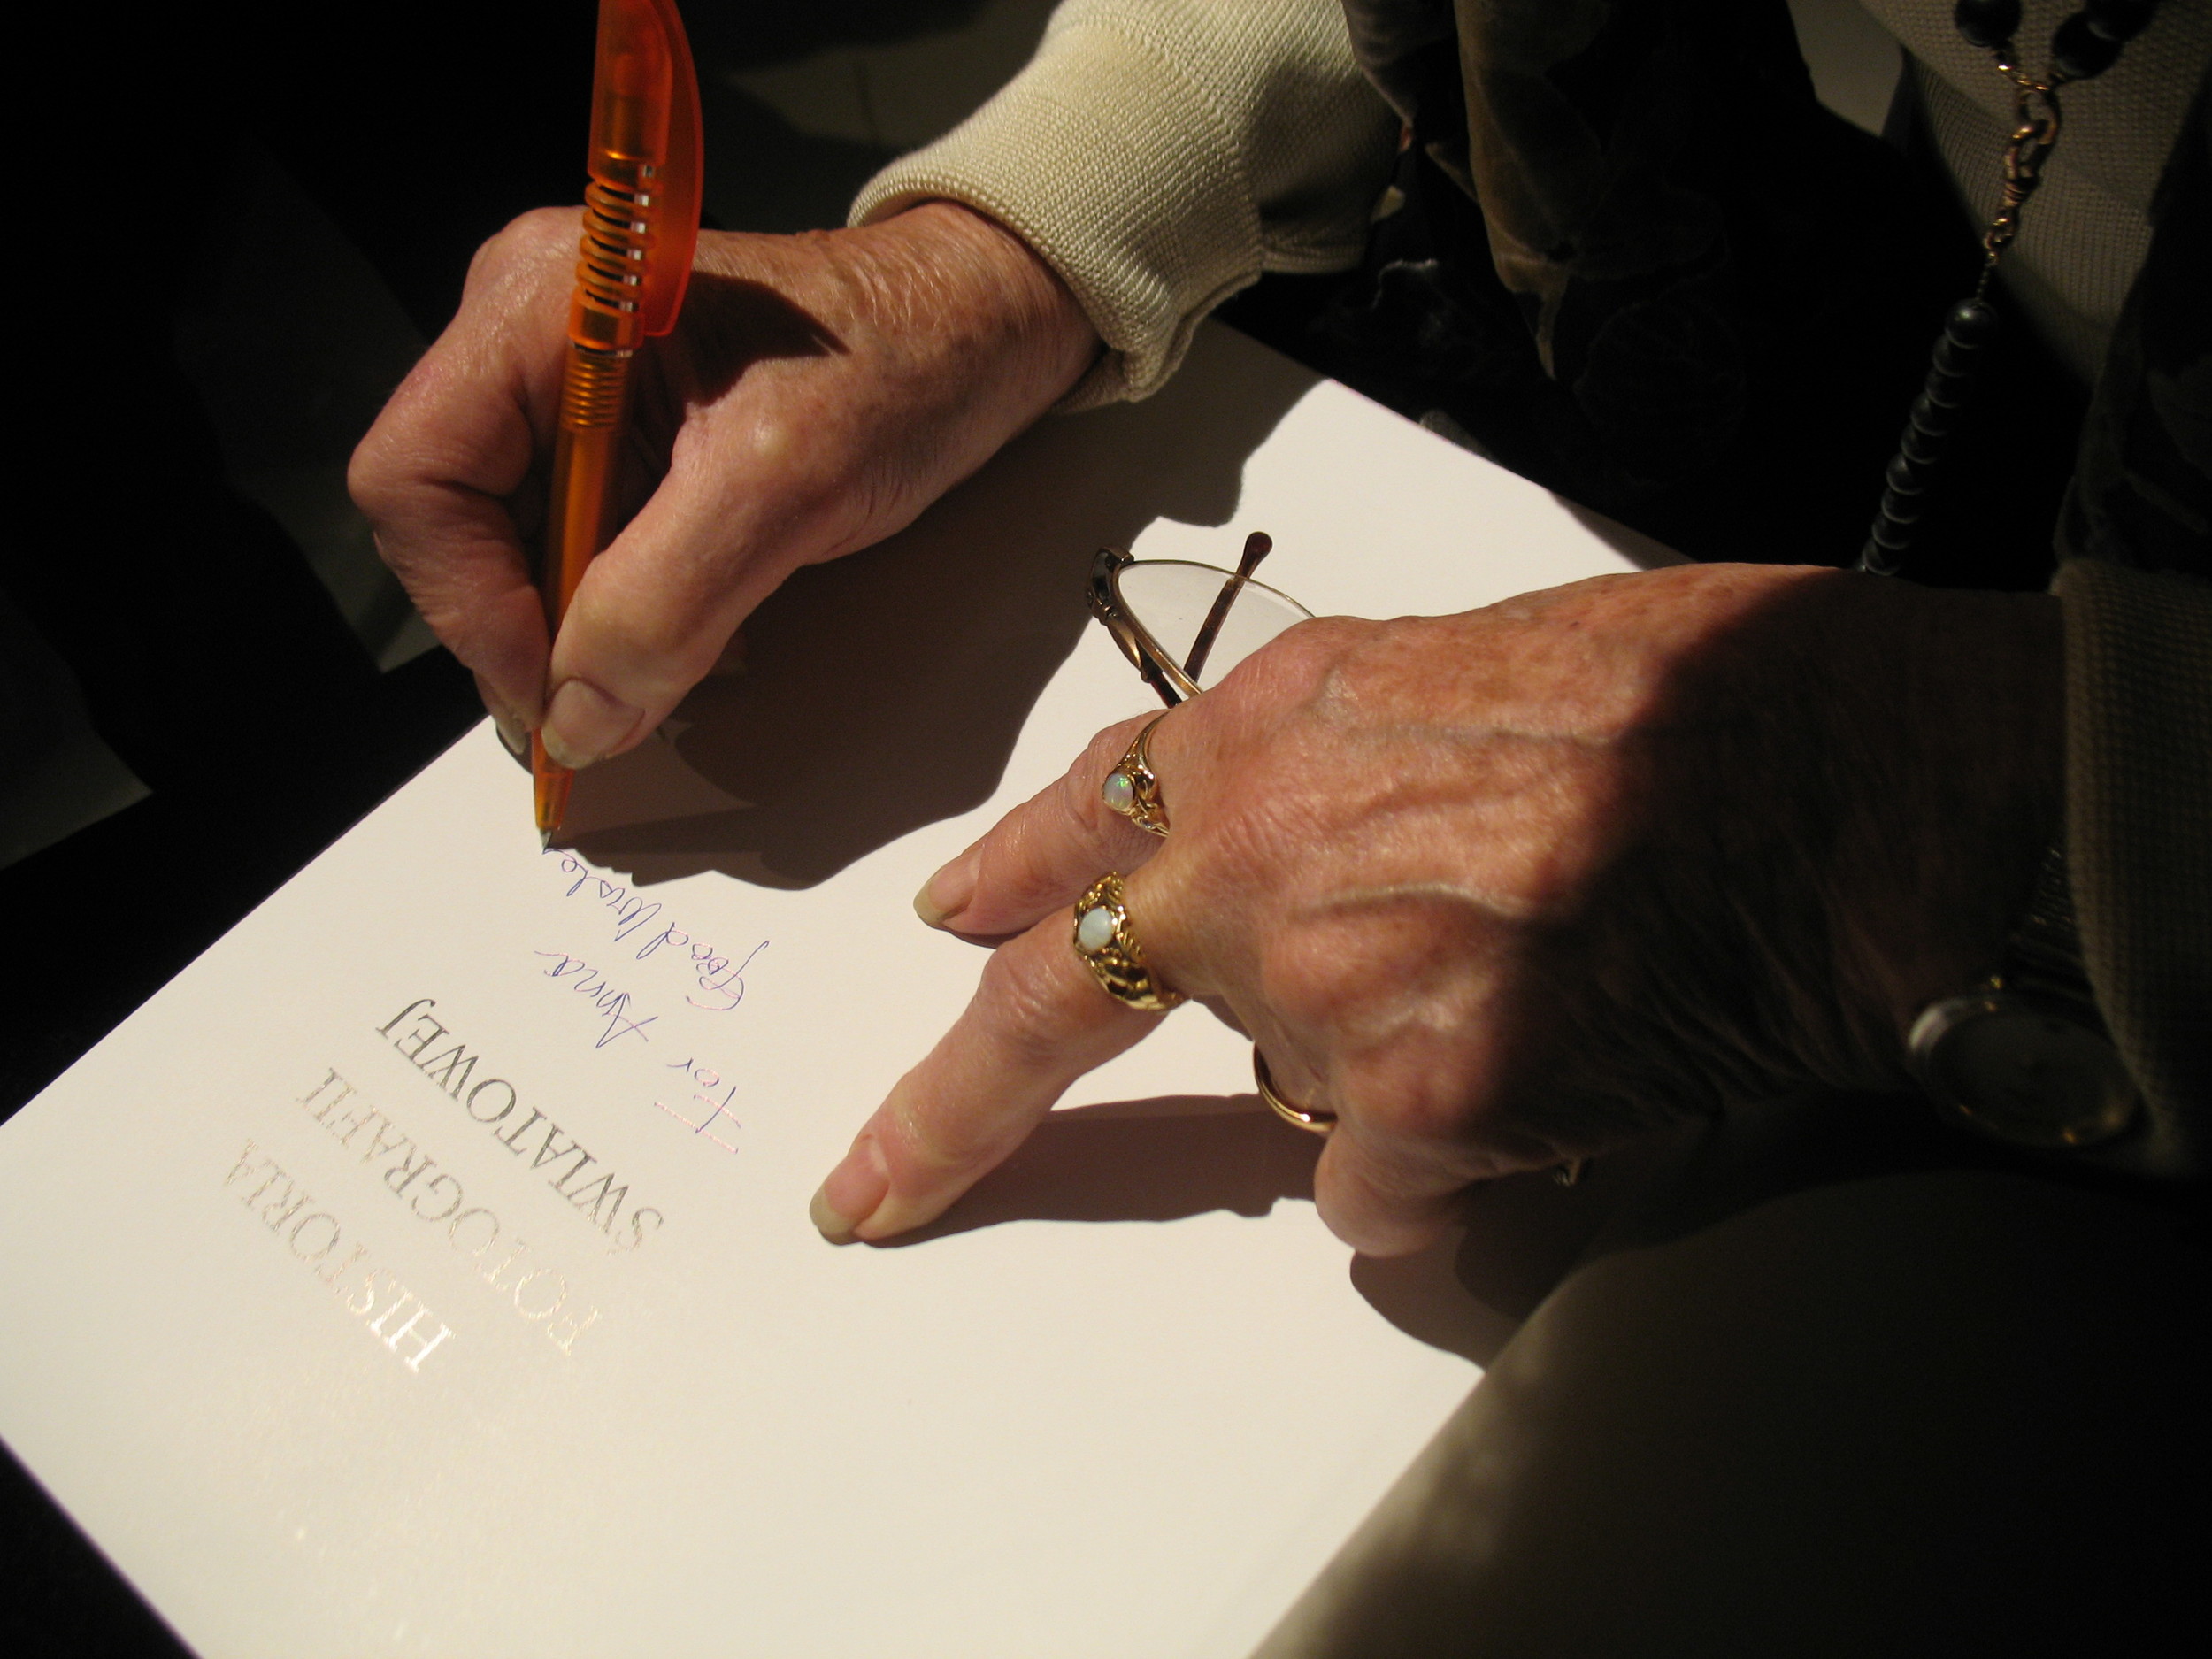 Naomi Rosenblum autographing her book "A World History of Photography"